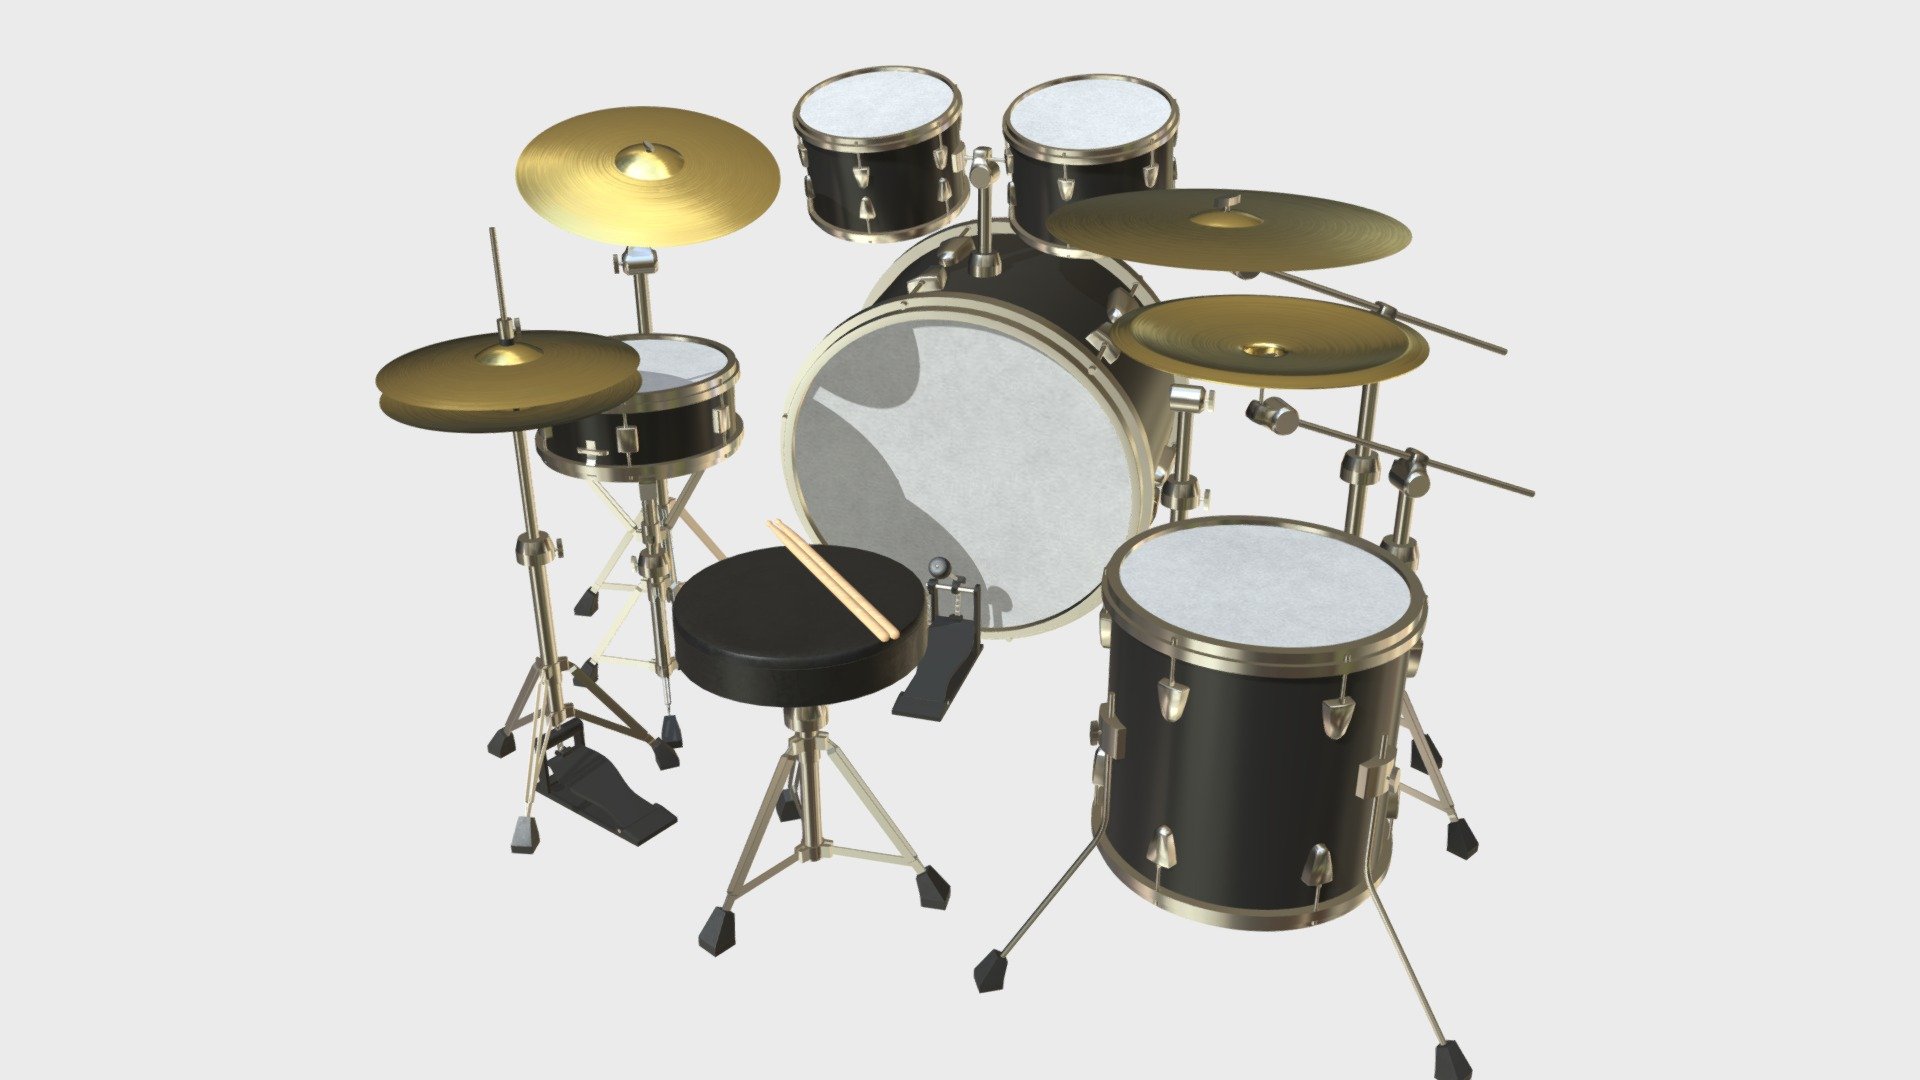 === The following description refers to the additional ZIP package provided with this model ===

A drum kit 3D Model. 11 individual objects (2 sticks, throne, bass drum, tom-toms, snare drum, floor tom drum, ride cymbal, crash cymbal, hi-hat cymbal, China cymbal; so, you can easily move, rotate or even scale each item), sharing the same non overlapping UV Layout map, Material and PBR Textures set. Production-ready 3D Model, with PBR materials, textures, non overlapping UV Layout map provided in the package.

Quads only geometries (no tris/ngons).

Formats included: FBX, OBJ; scenes: BLEND (with Cycles / Eevee PBR Materials and Textures); other: 16-bit PNGs with Alpha.

11 Objects (meshes), 1 PBR Material, UV unwrapped (non overlapping UV Layout map provided in the package); UV-mapped Textures.

UV Layout maps and Image Textures resolutions: 2048x2048; PBR Textures made with Substance Painter.

Polygonal, QUADS ONLY (no tris/ngons); 188829 vertices, 187439 quad faces (374878 tris) 3d model